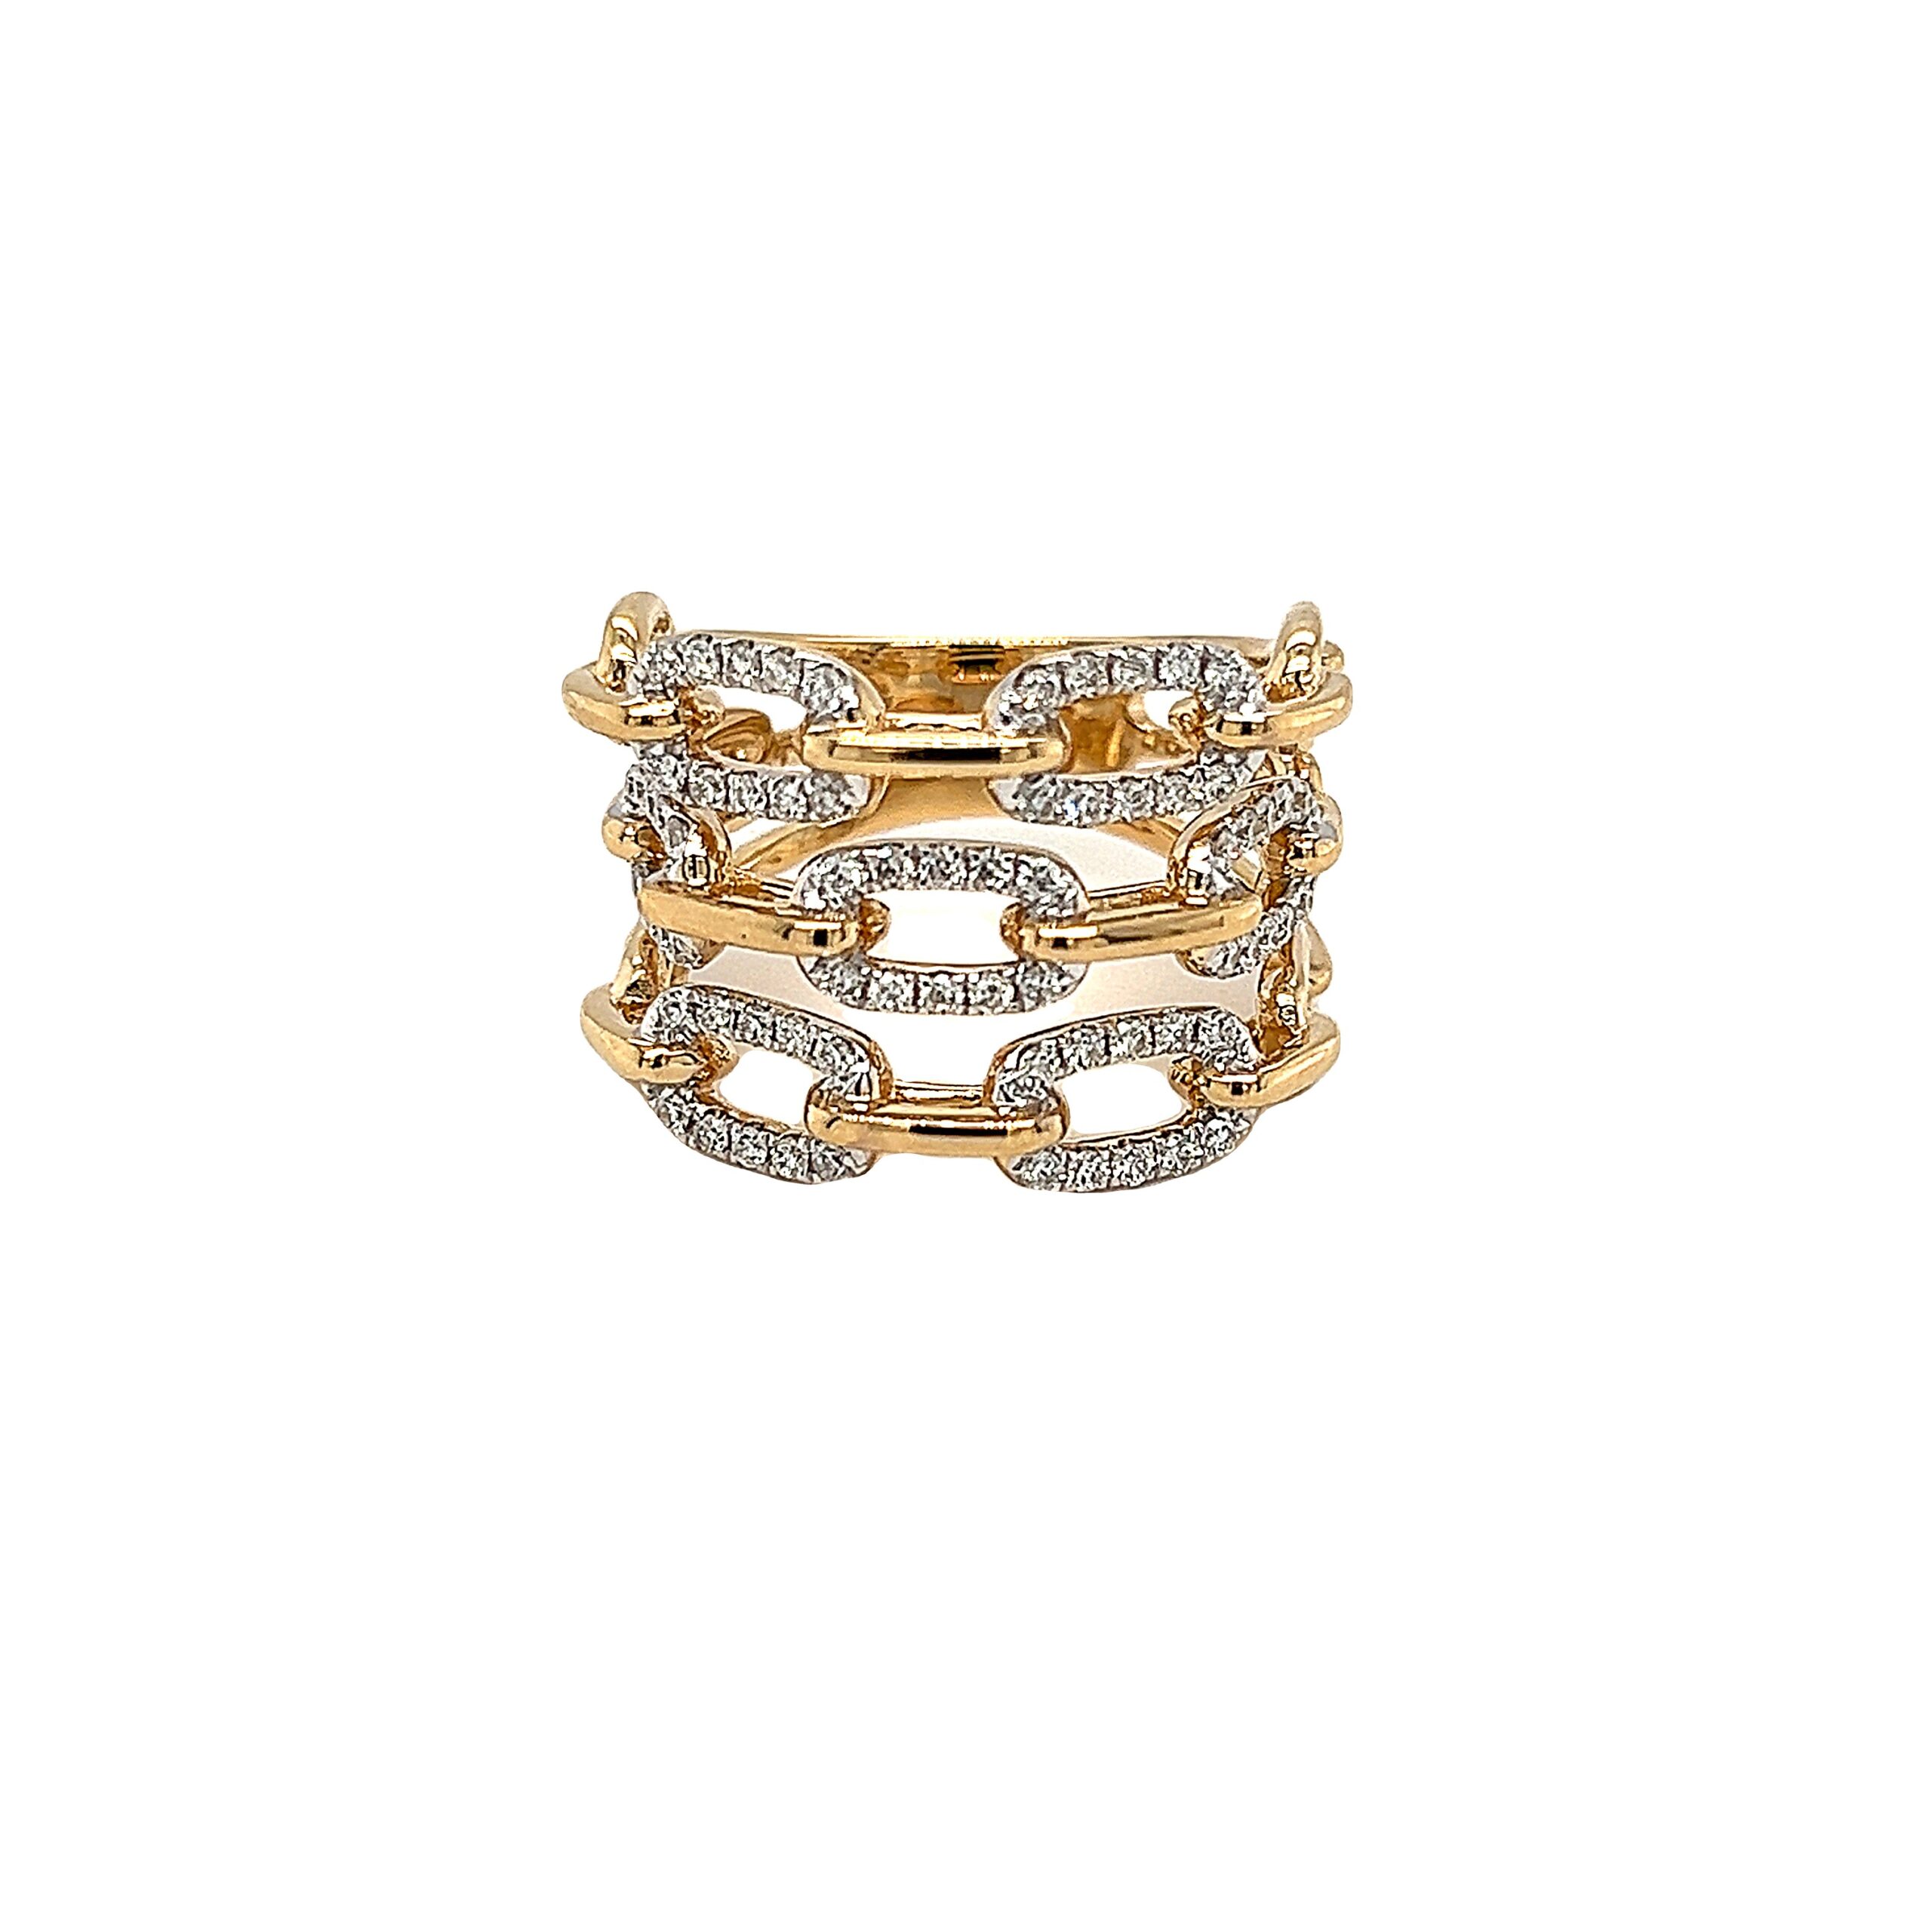 Featured image for “Chunky Chain Ring”